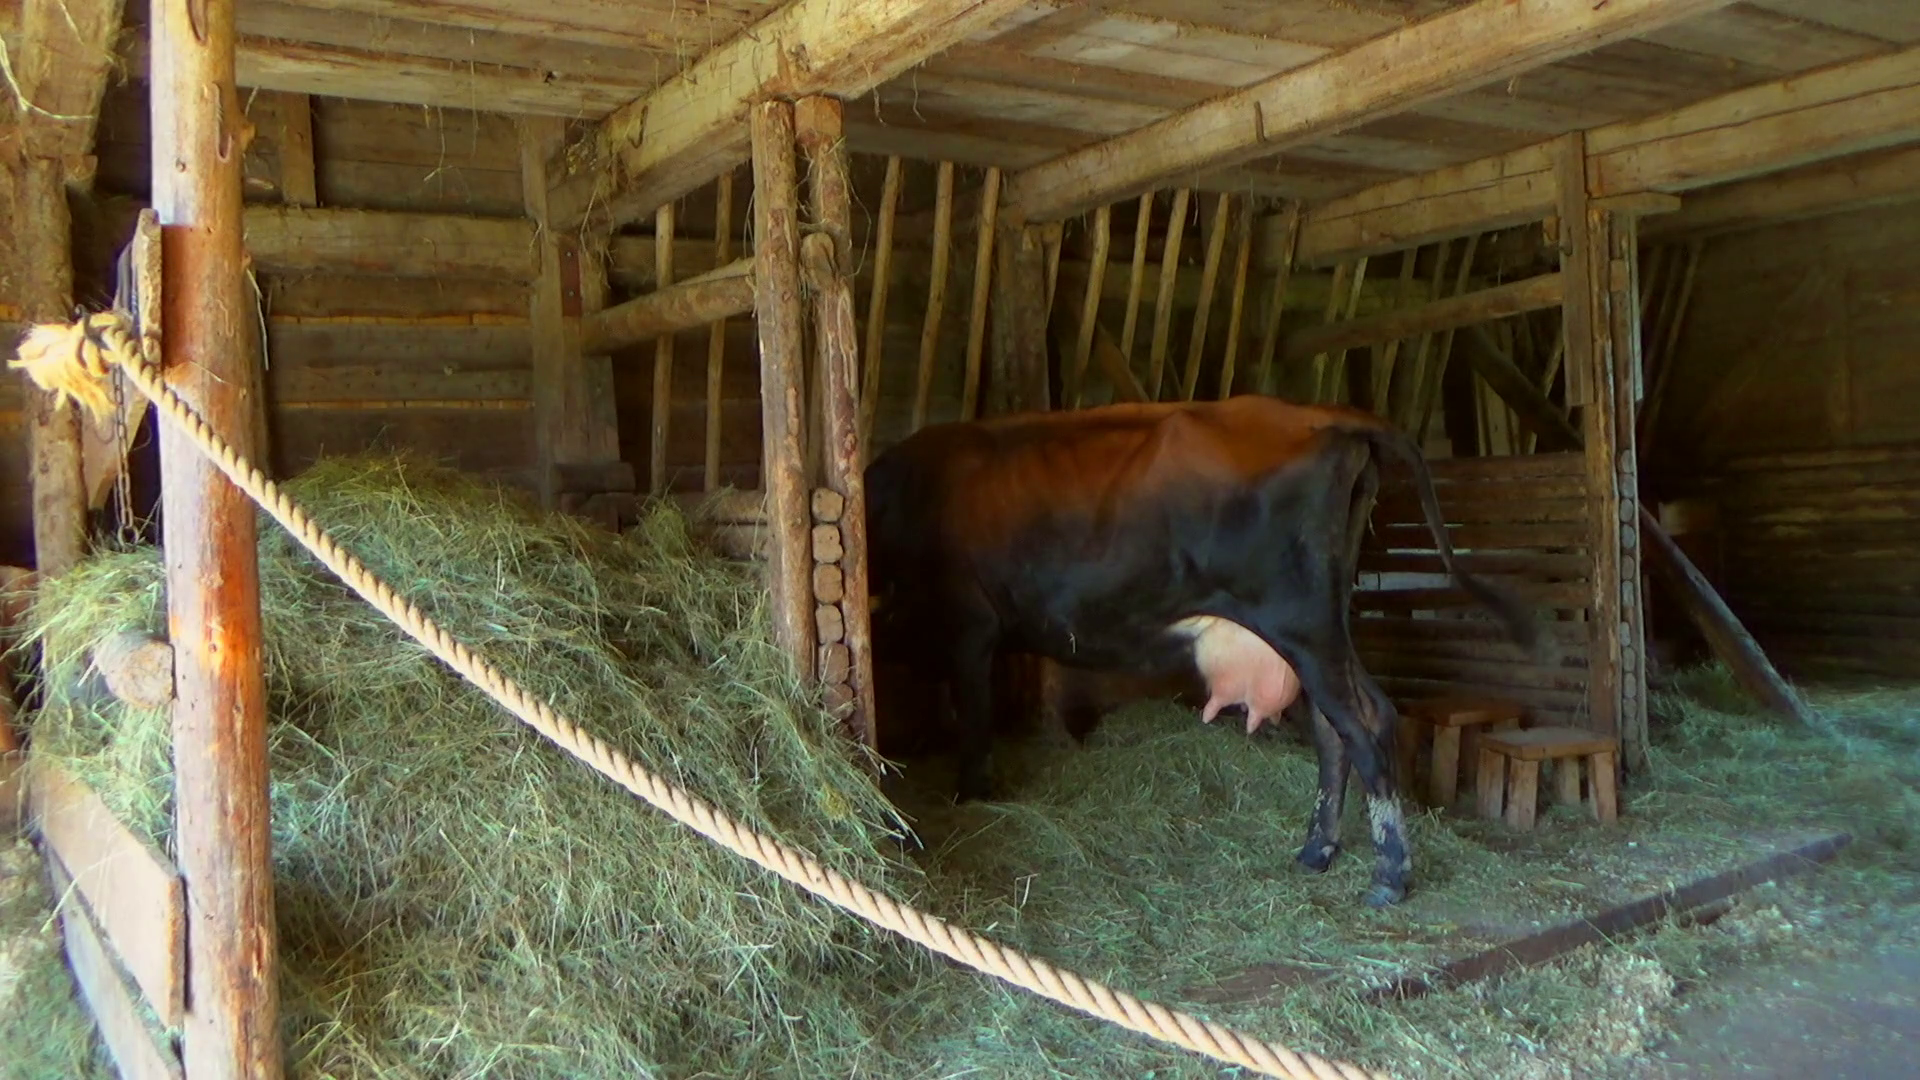 Cow In Shed PNG - 170666